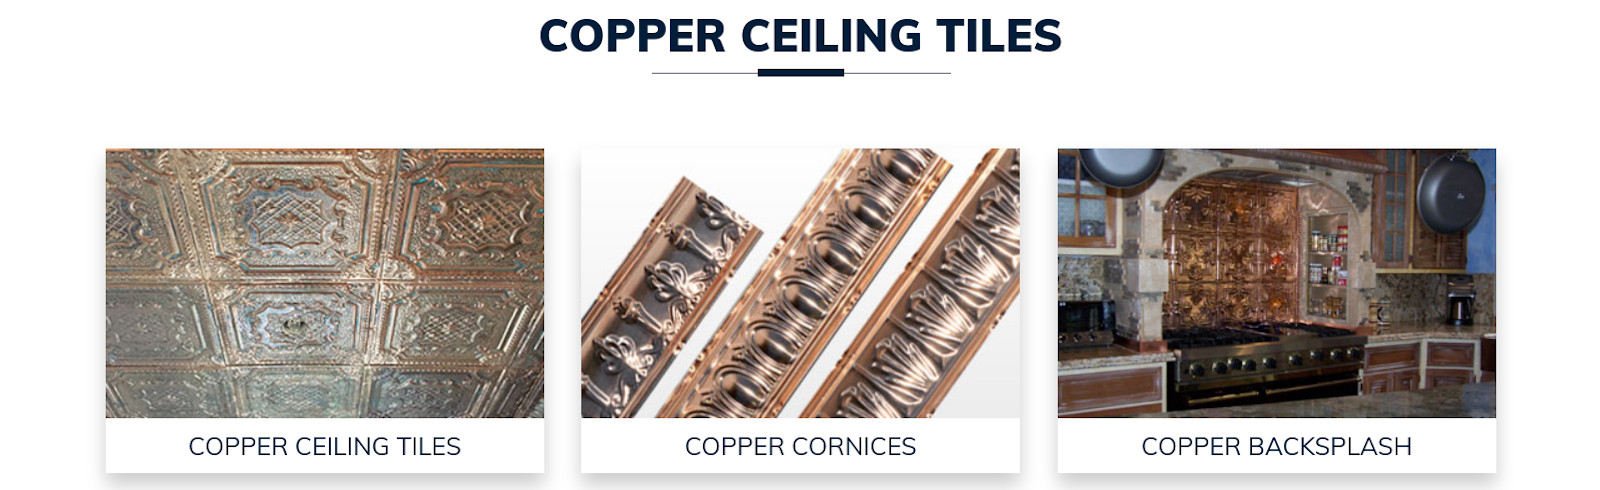 copper ceiling tiles closeout price